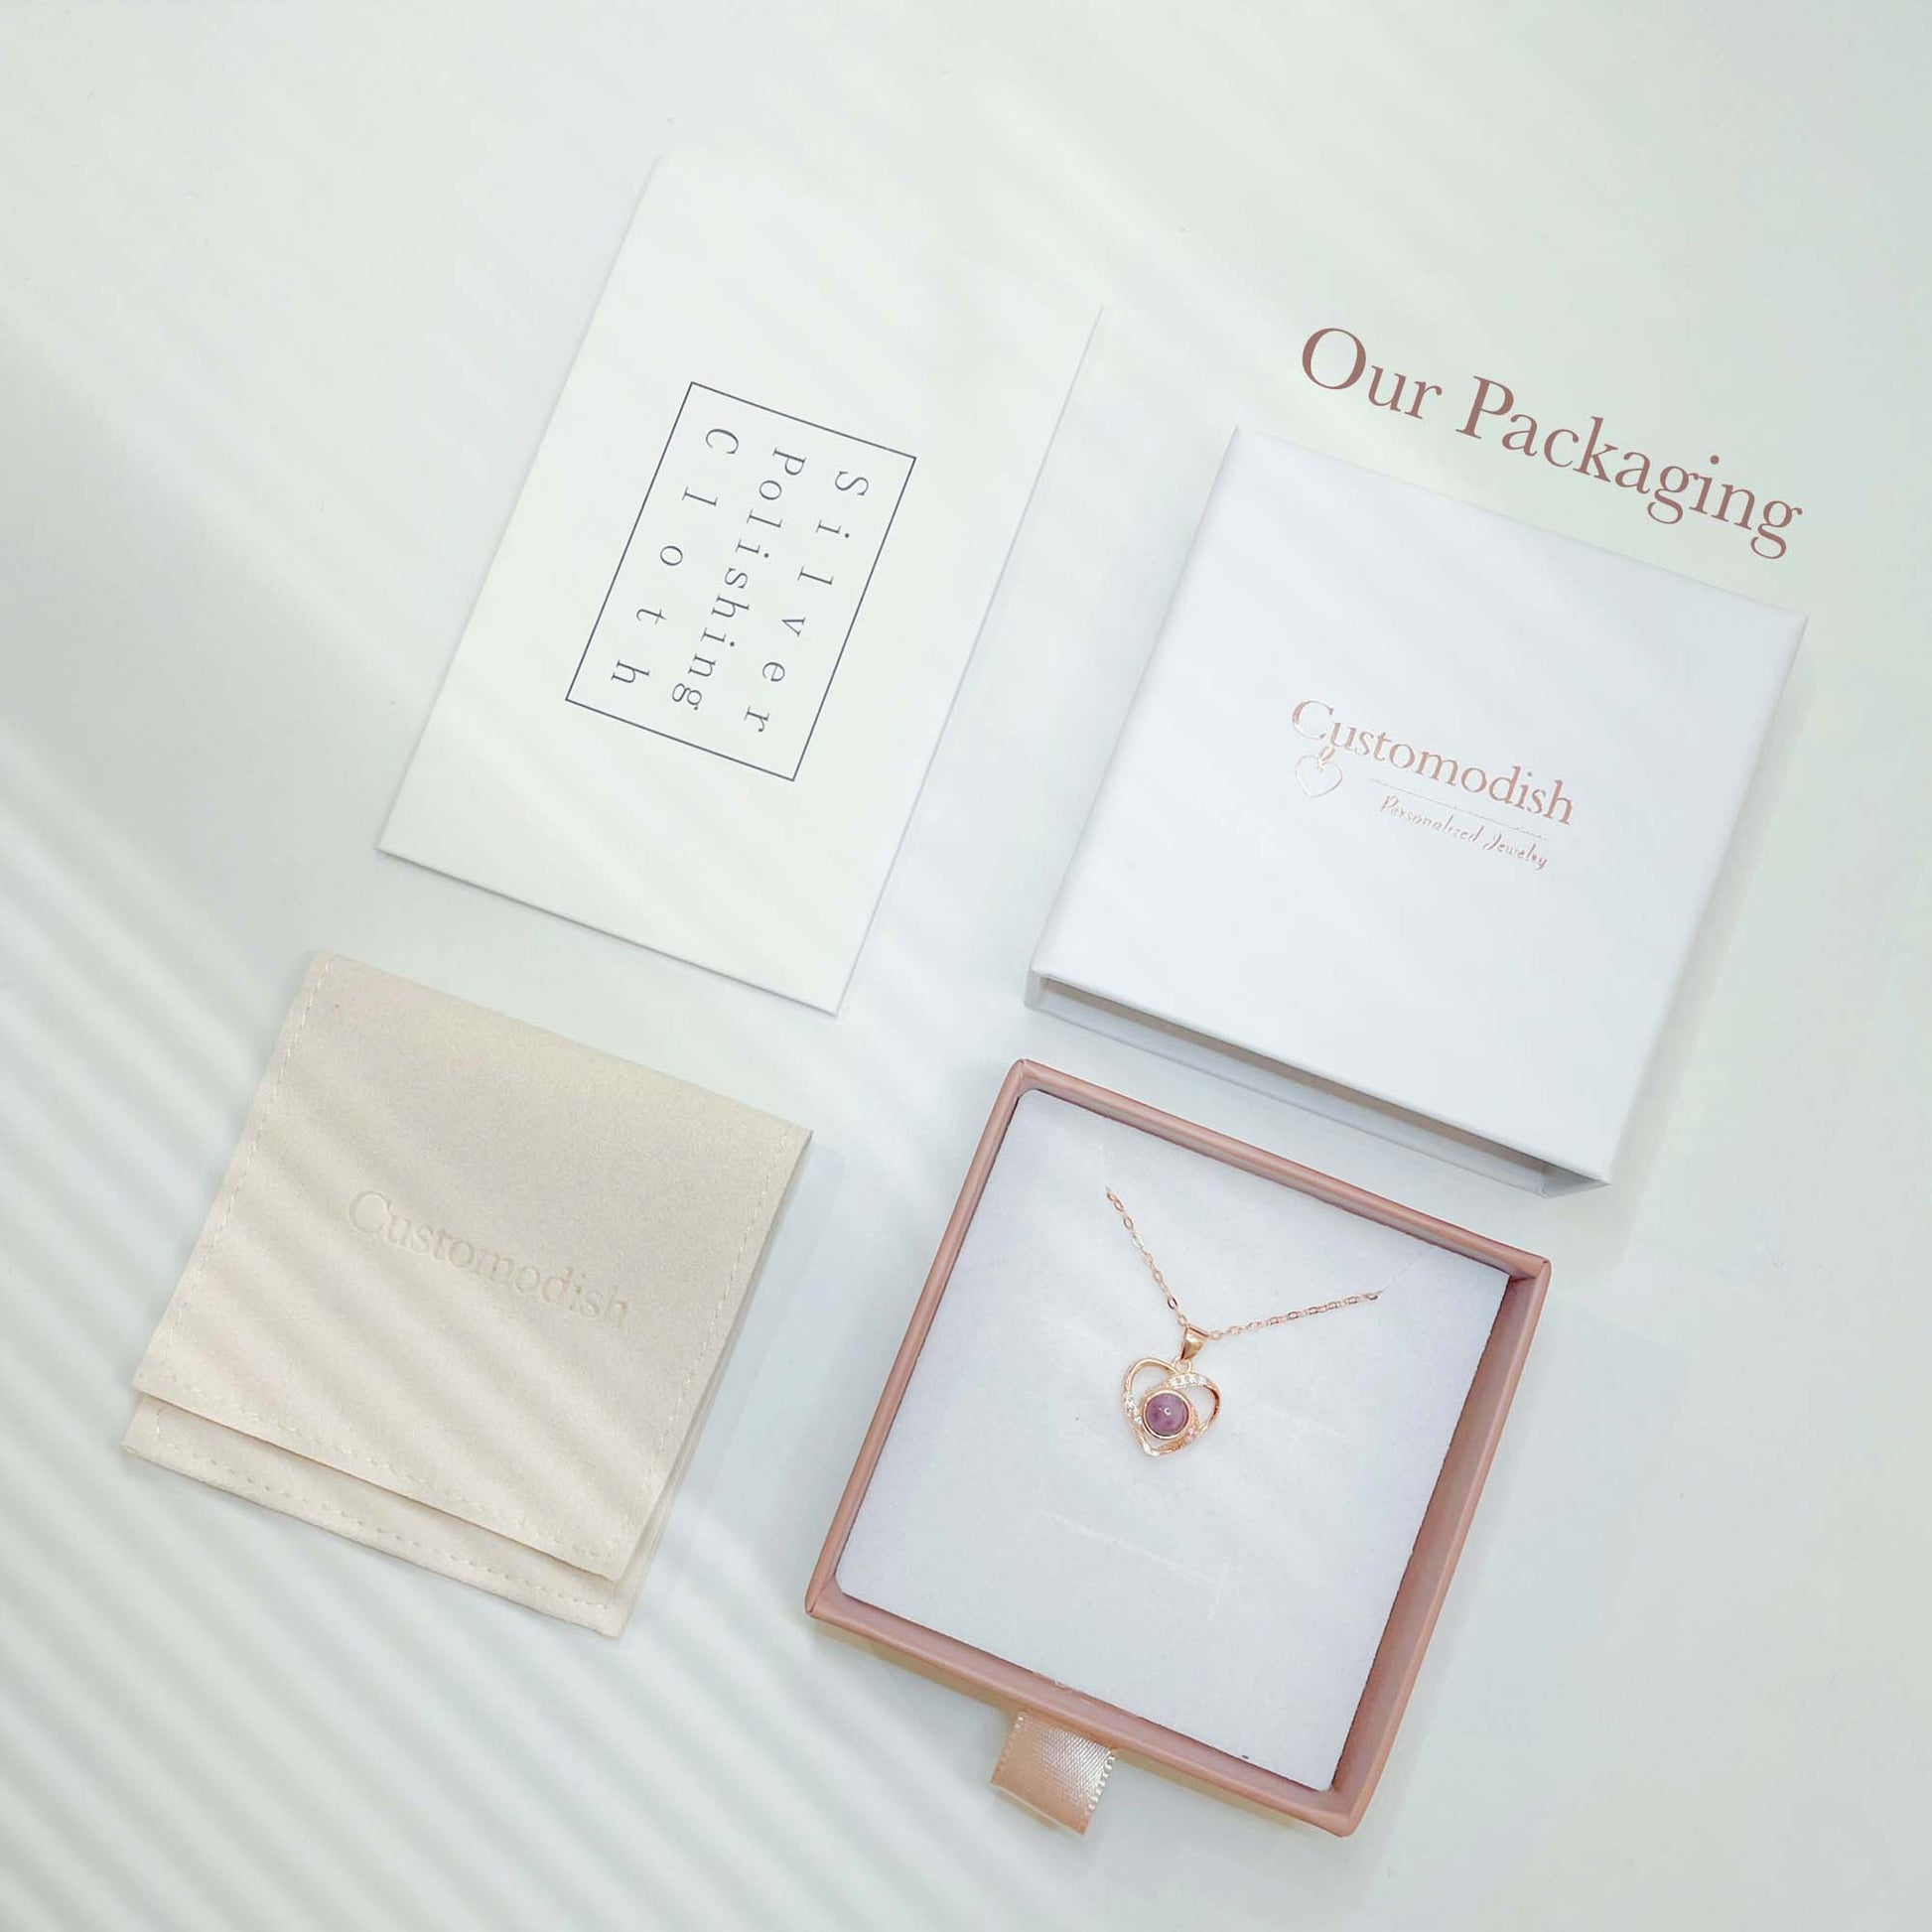 Your photo projection necklace will be put in our jewelry box with a jewelry pouch